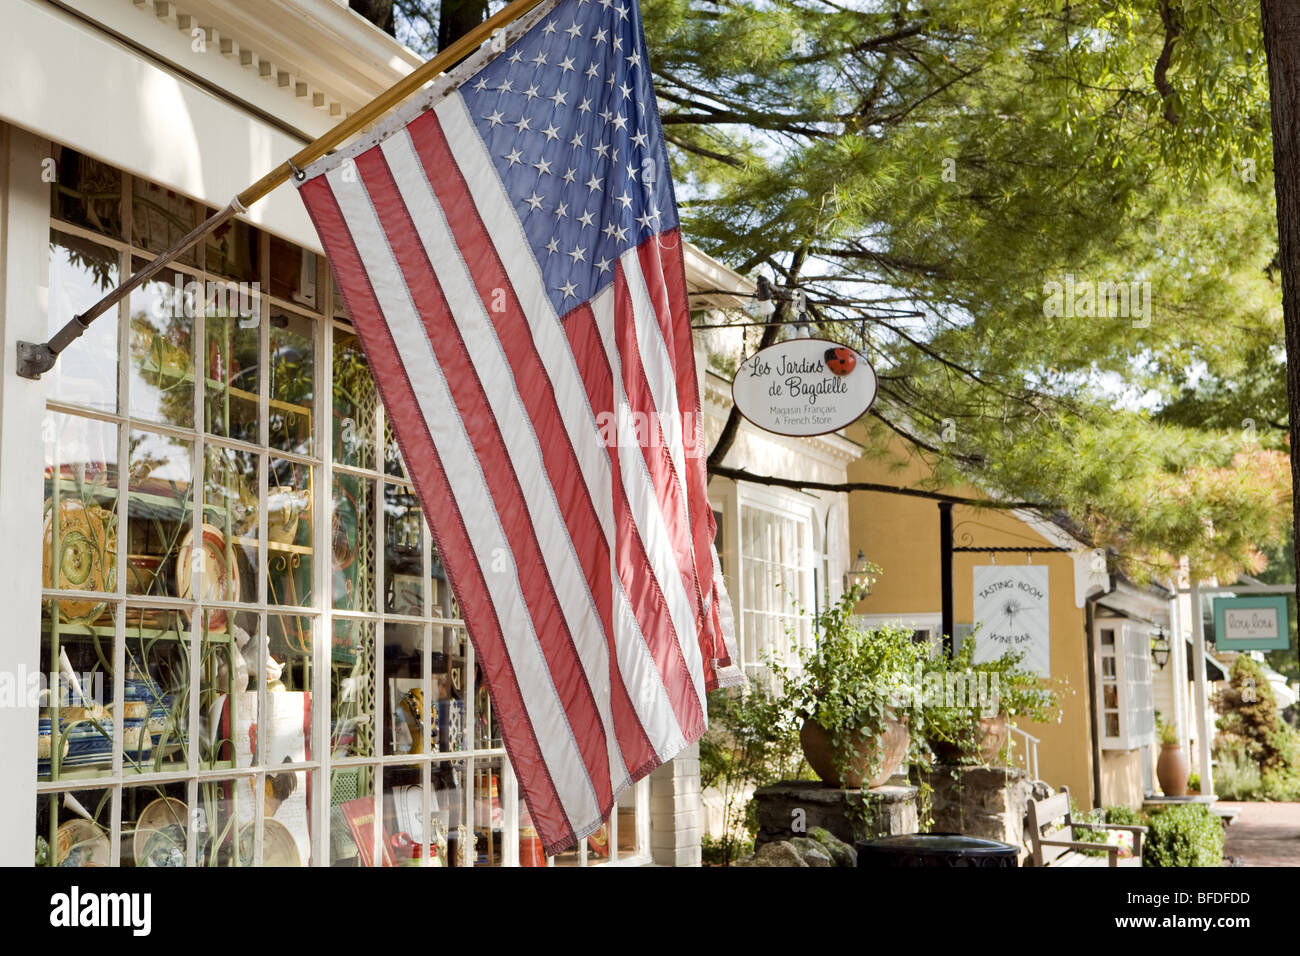 American flag in picturesque smalltown souvenir shops setting. Stock Photo